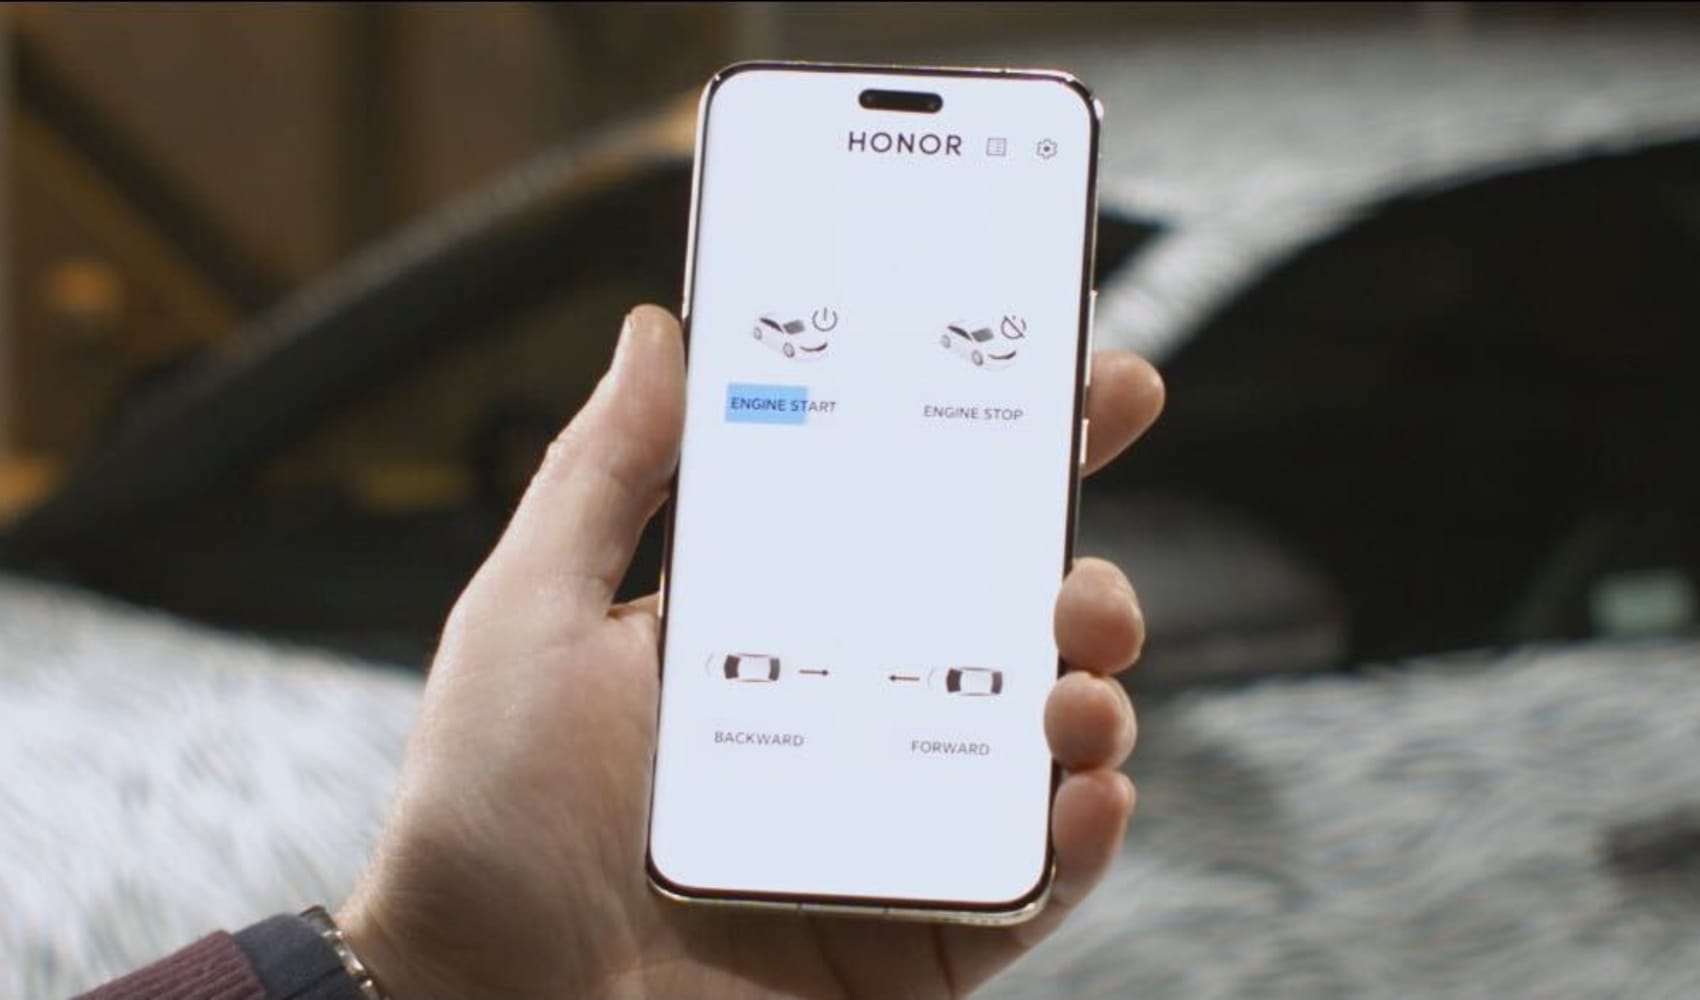 Huawei spin-off Honor shows off tech to control a car with your eyes
and chatbot based on Meta's AI